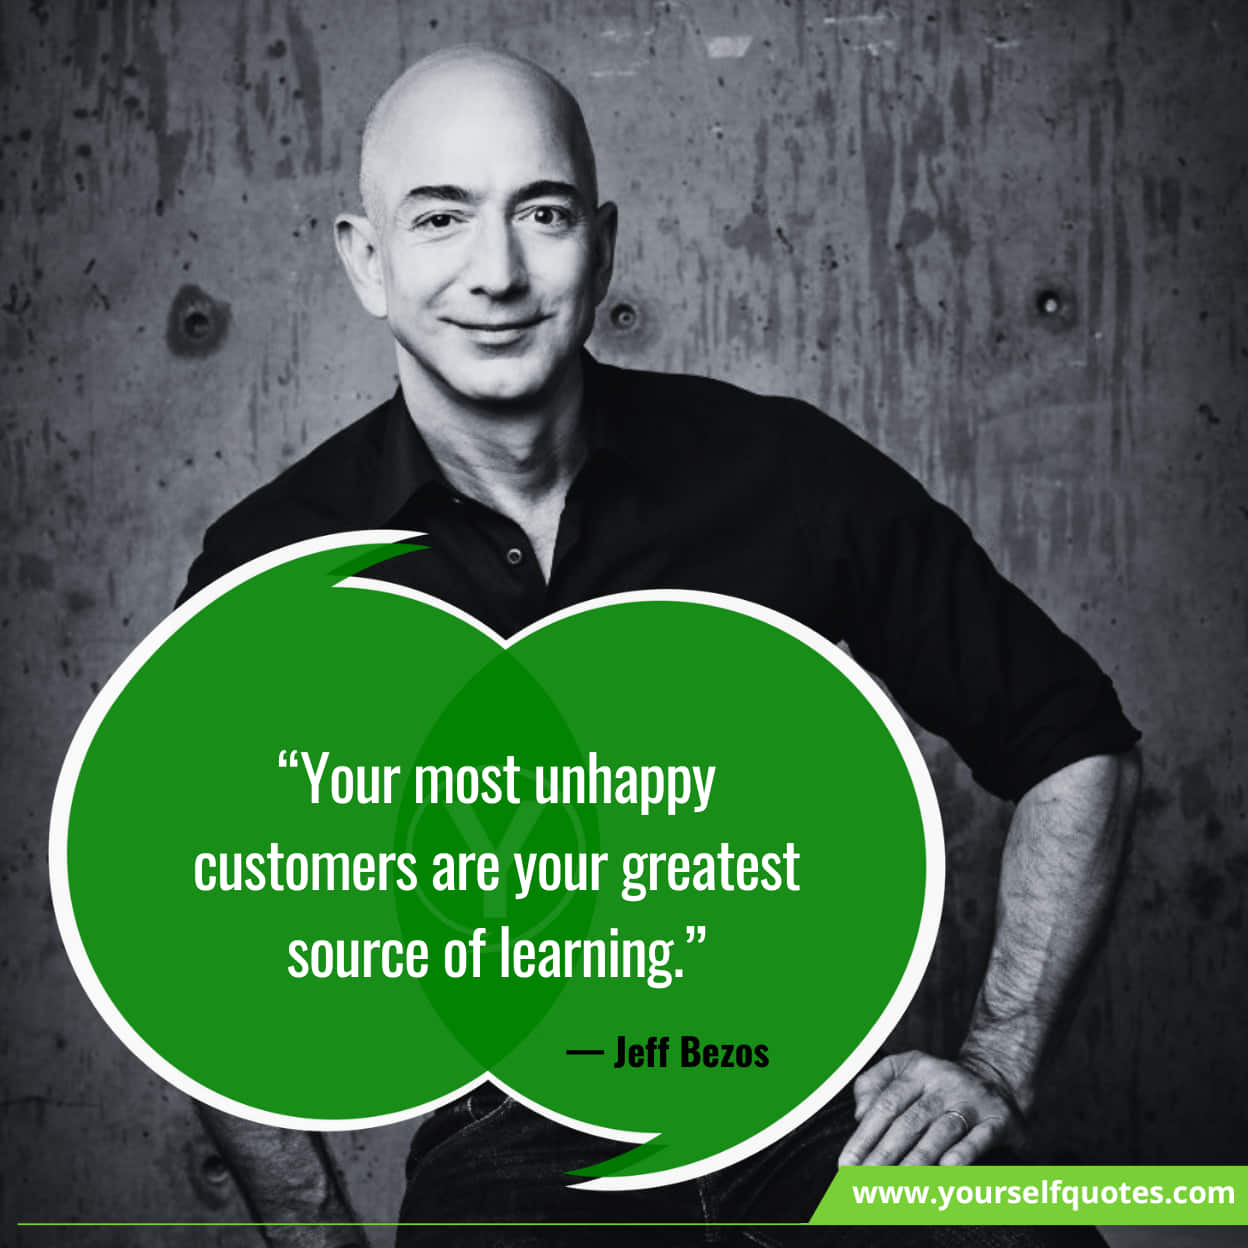 Top 5 Most Inspiring Business Quotes To Motivate You Today